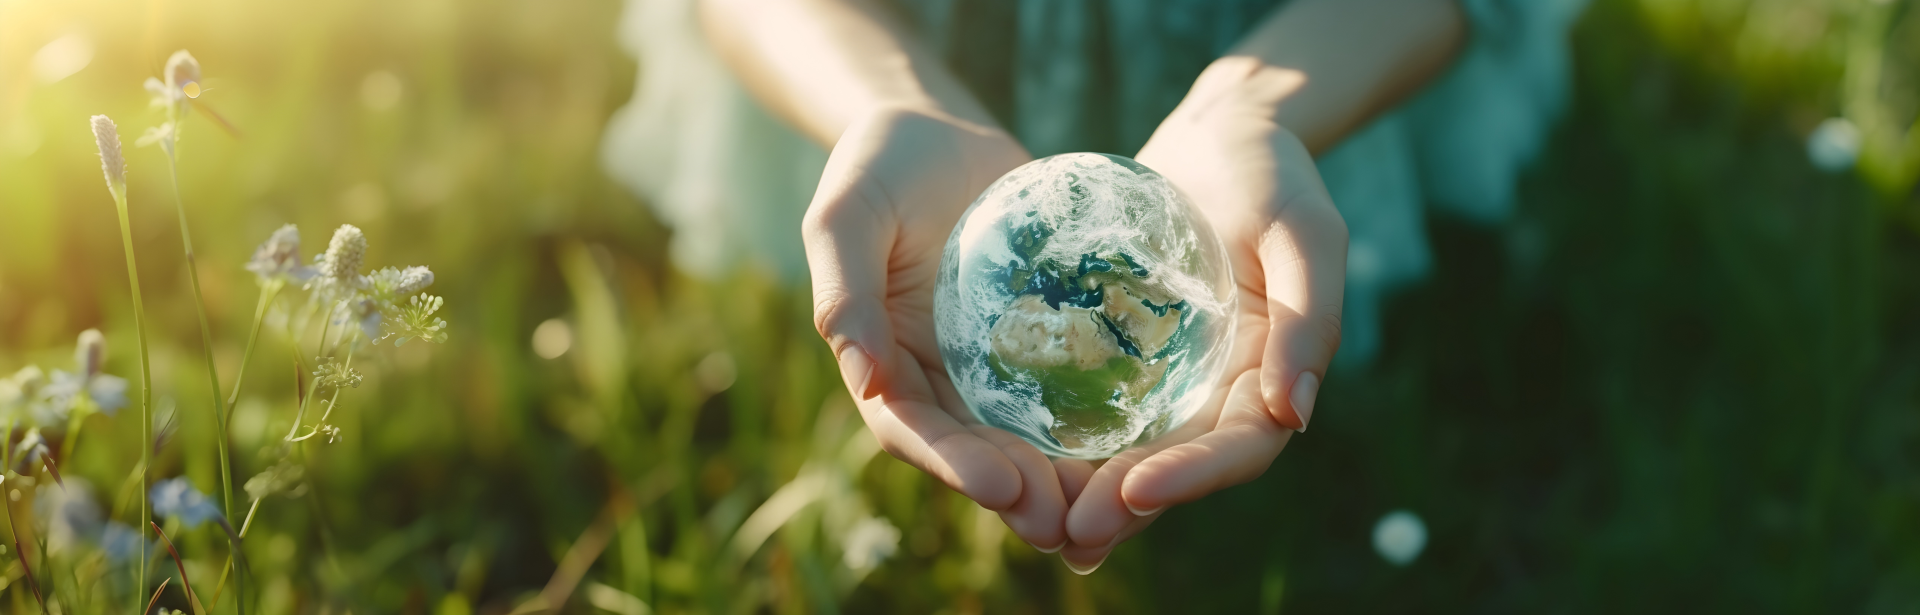 Hands holding a glass ball globe of the world in a green meadow